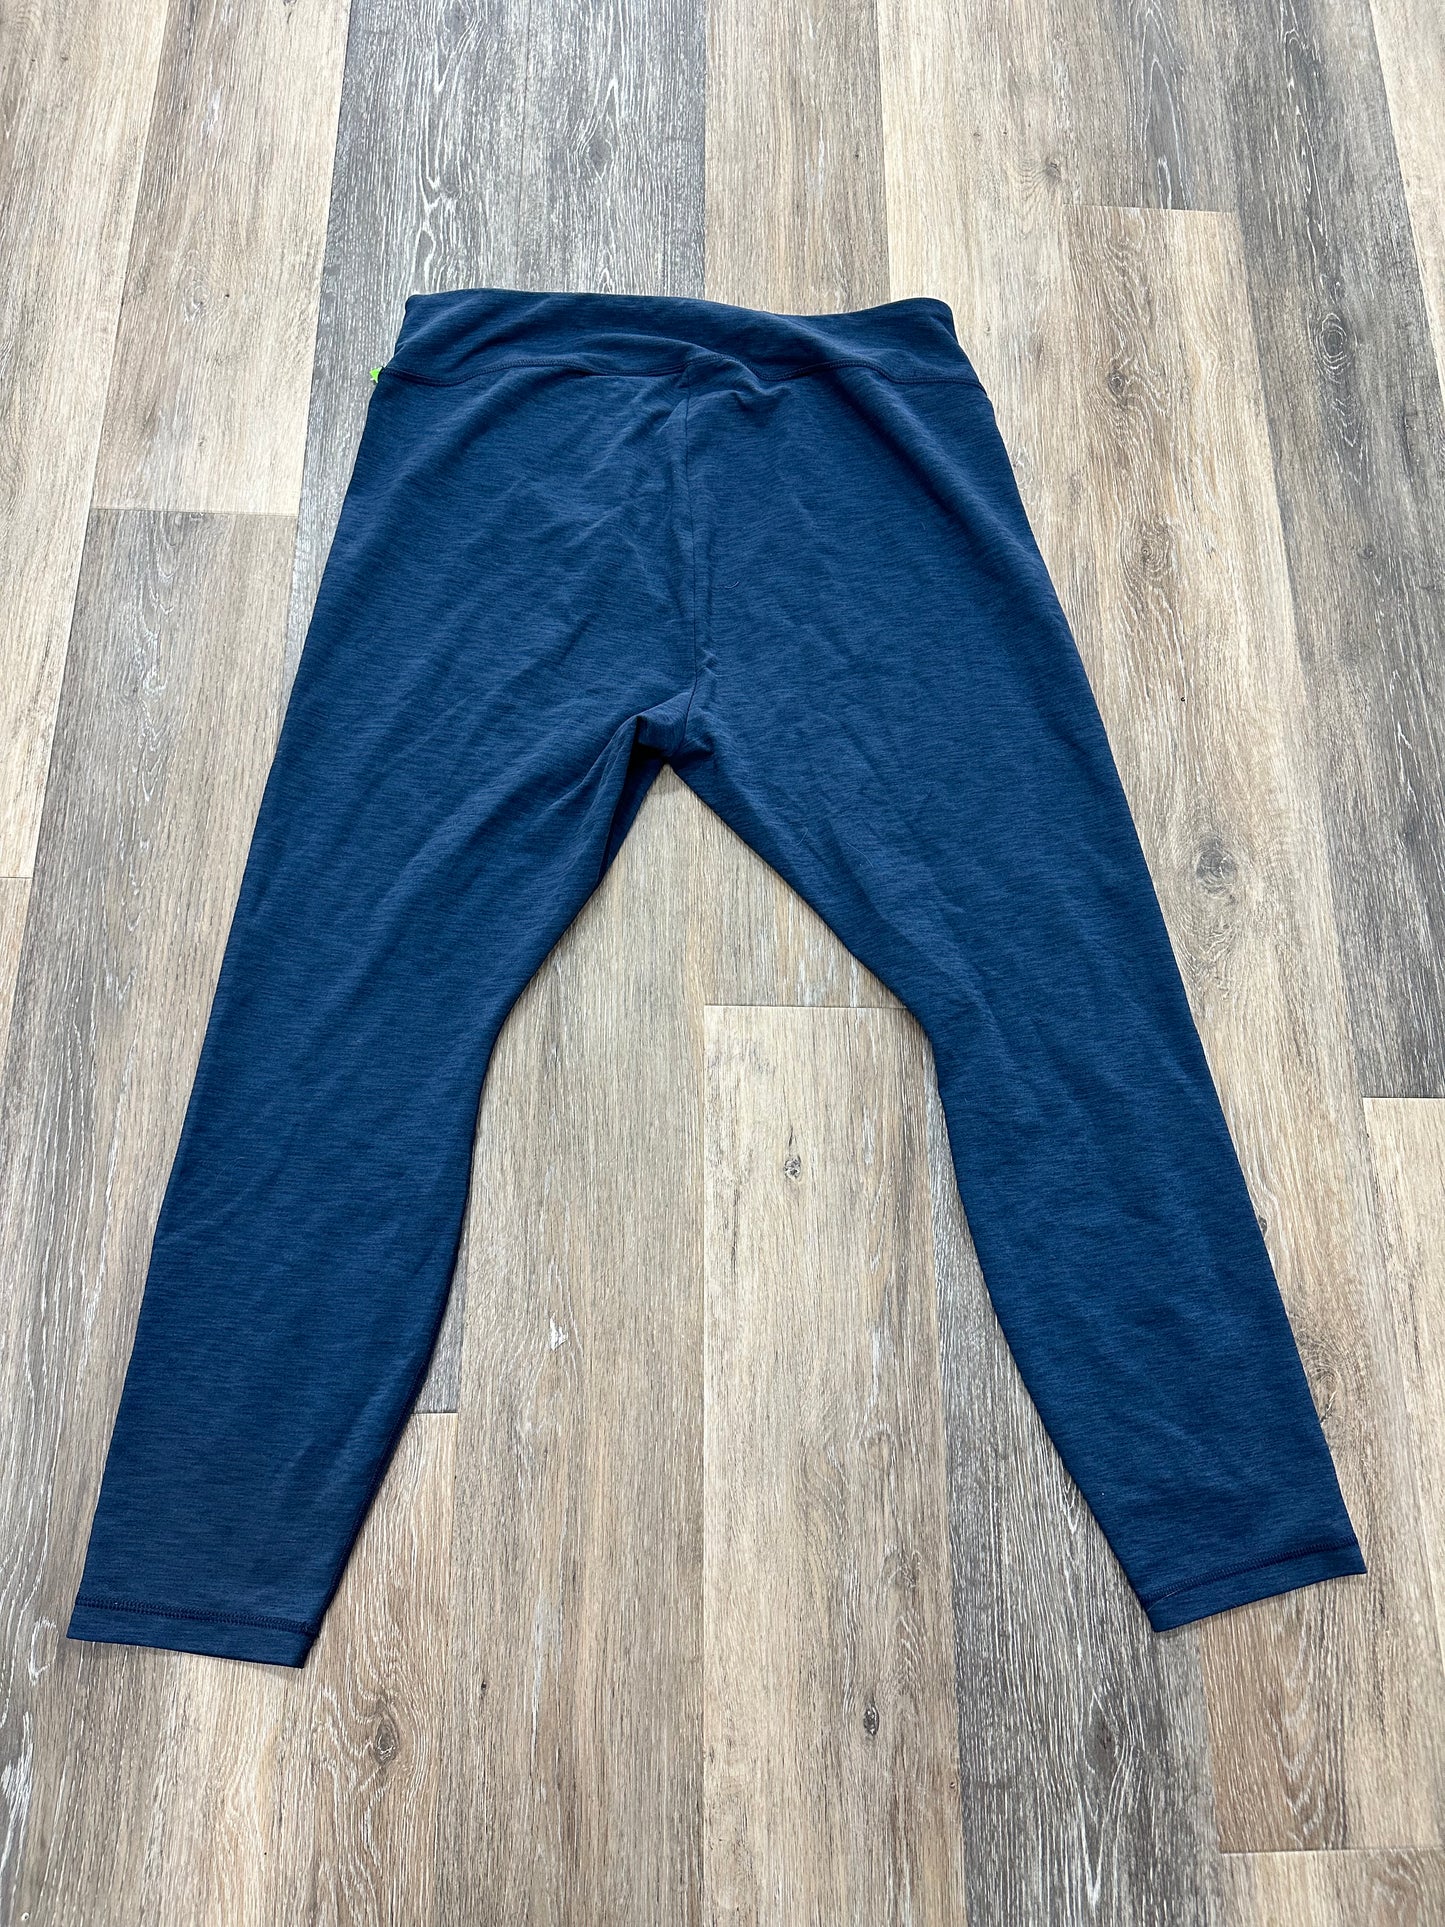 Athletic Leggings By Duluth Trading  Size: 2x